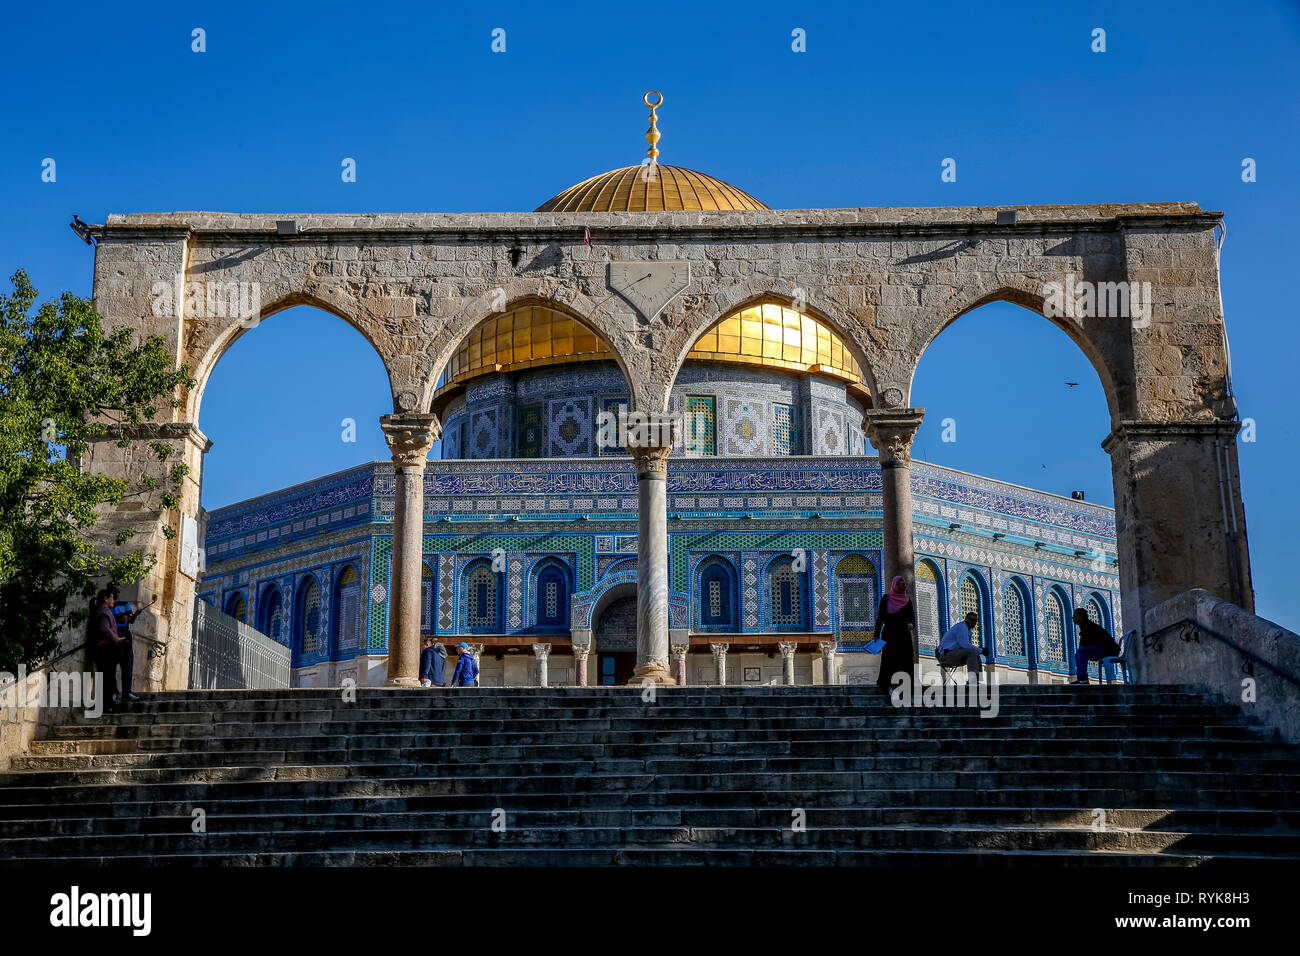 Staircase leading to the Dome of the Rock, East Jerusalem, Israel. Stock Photo